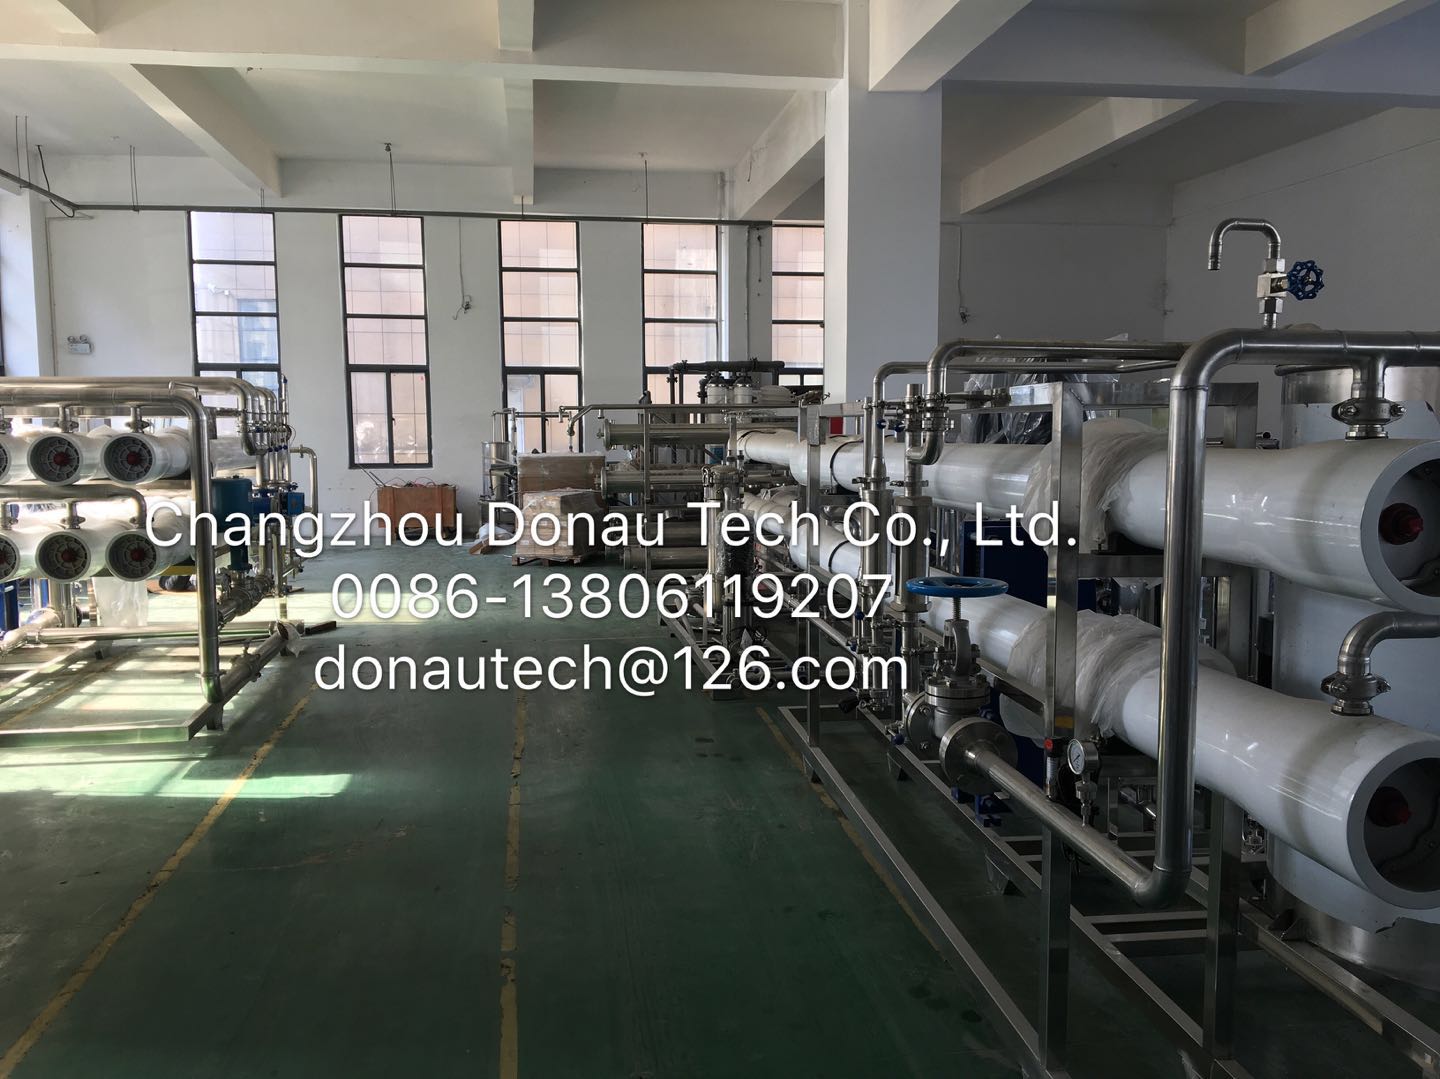 Fluidized bed coating system